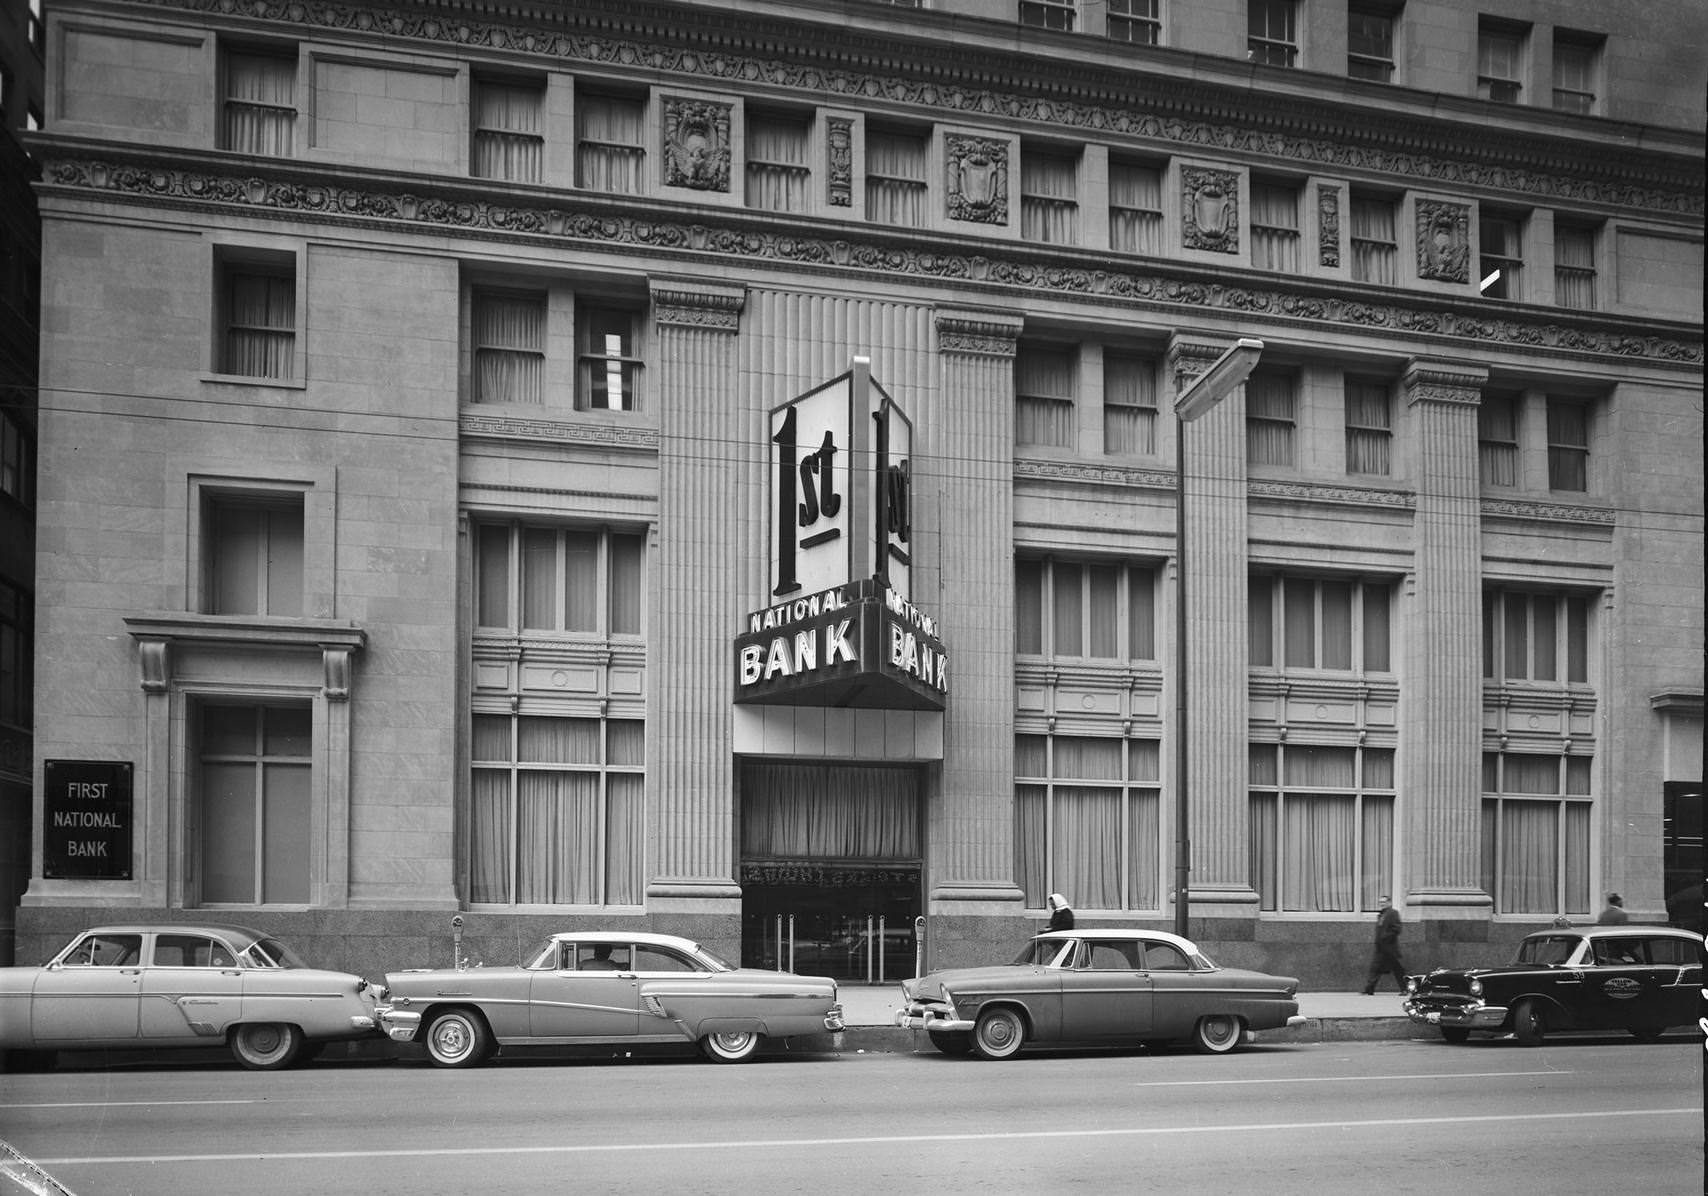 First National Bank building, downtown Dallas, Texas, 1958